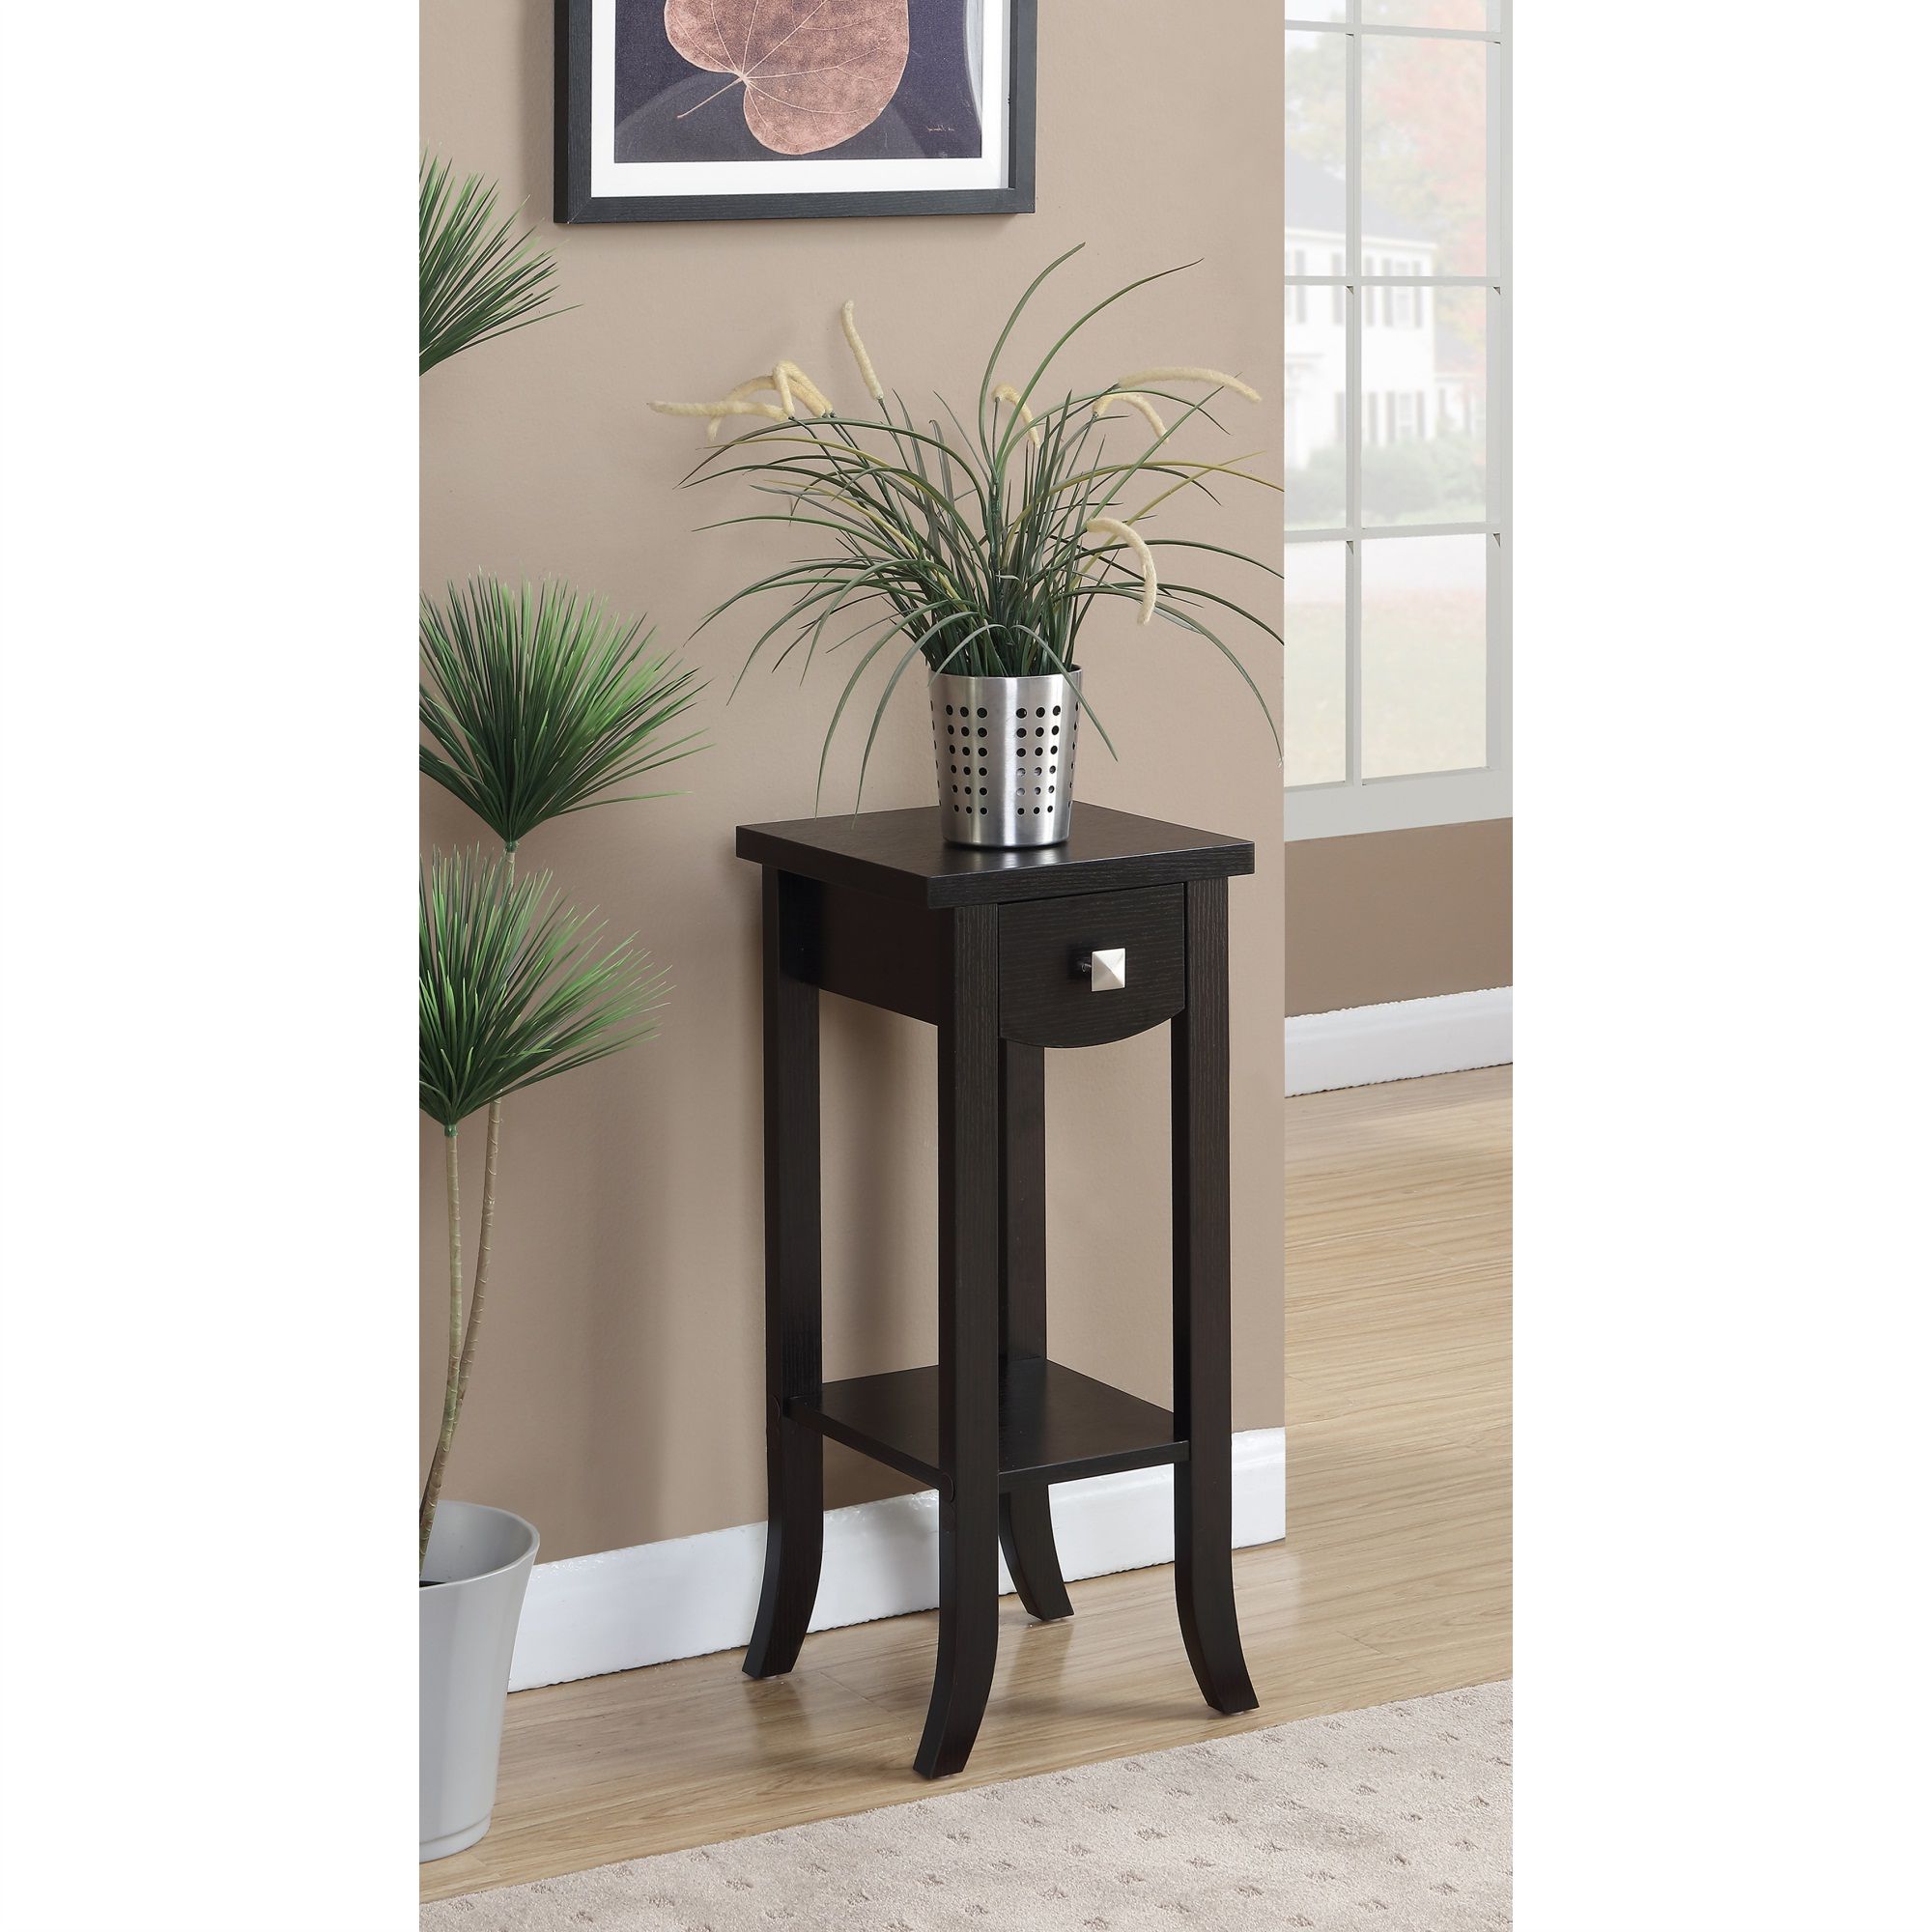 Preferred Newport Prism Medium Plant Stand – Walmart With Prism Plant Stands (View 1 of 10)